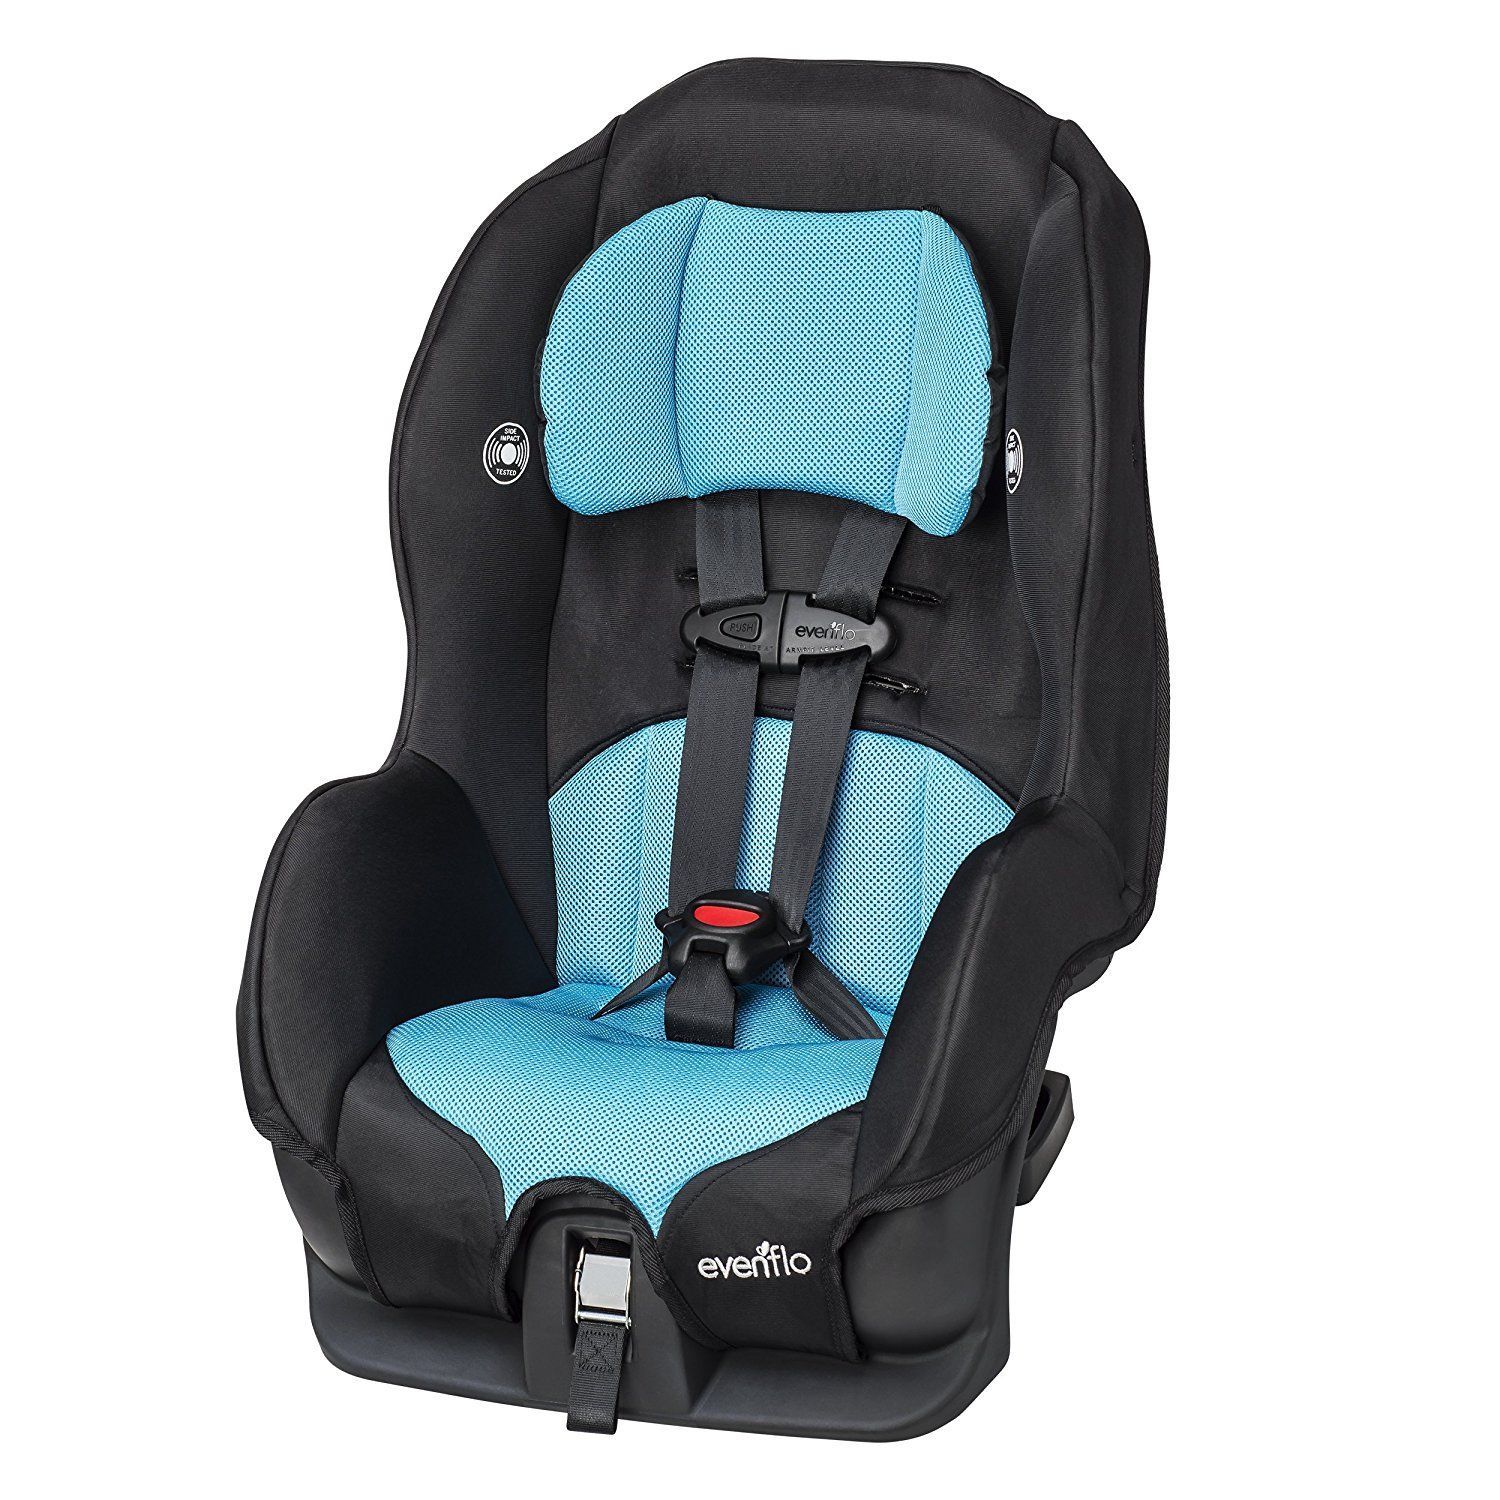 Evenflo Tribute LX Convertible Car Seat, Saturn-Fast Free Shipping  - $64.34 - $89.09